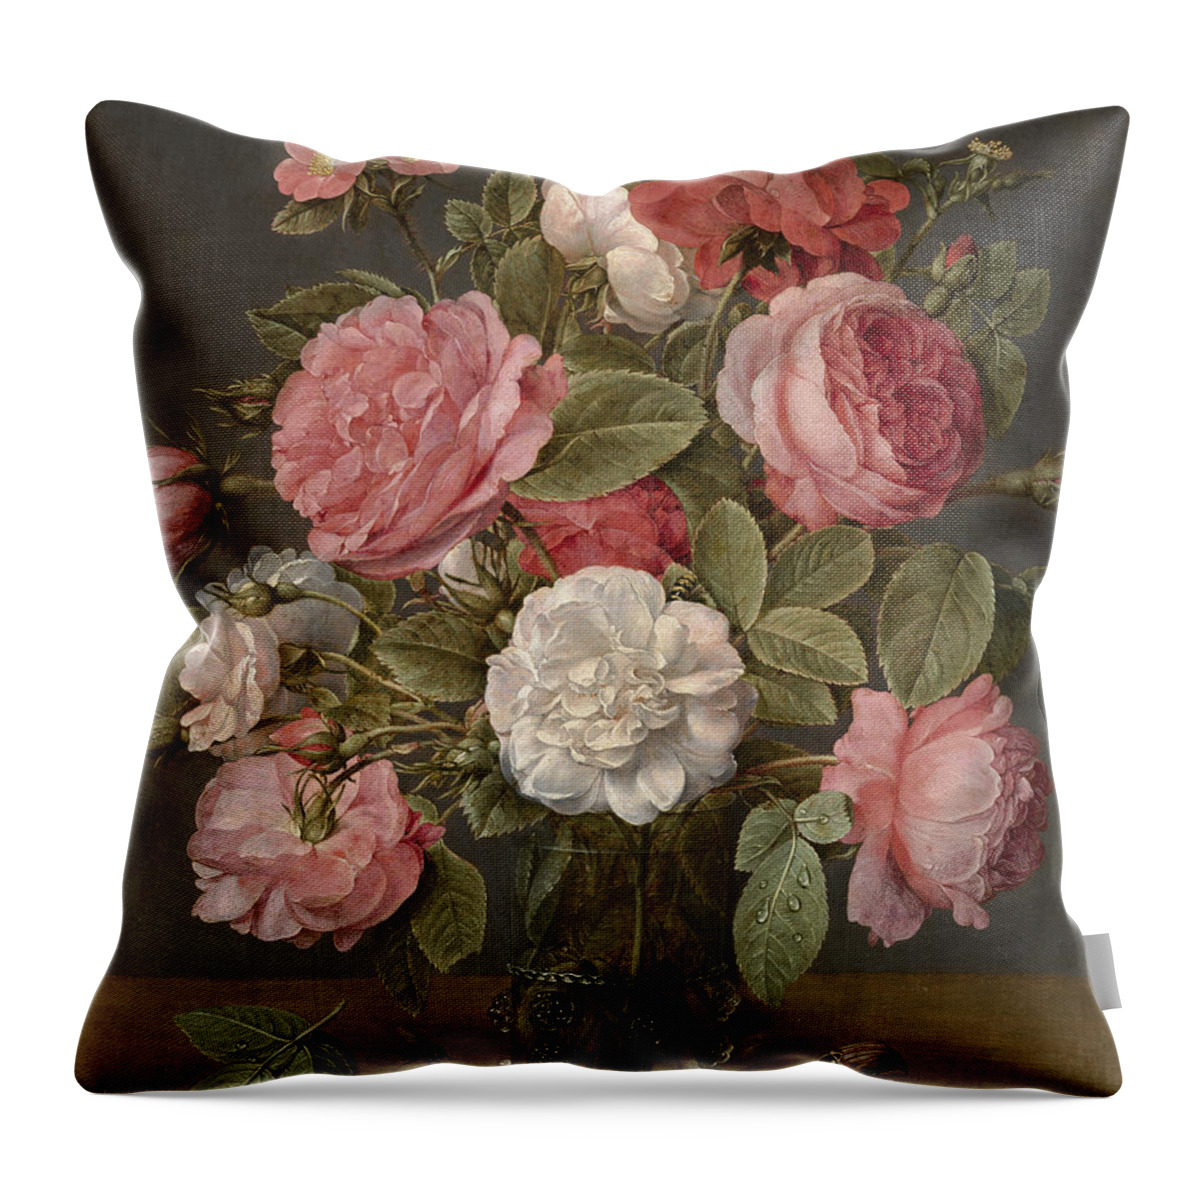 Glass Vase Throw Pillow featuring the painting Roses in a Glass Vase by Jacob van Hulsdonck